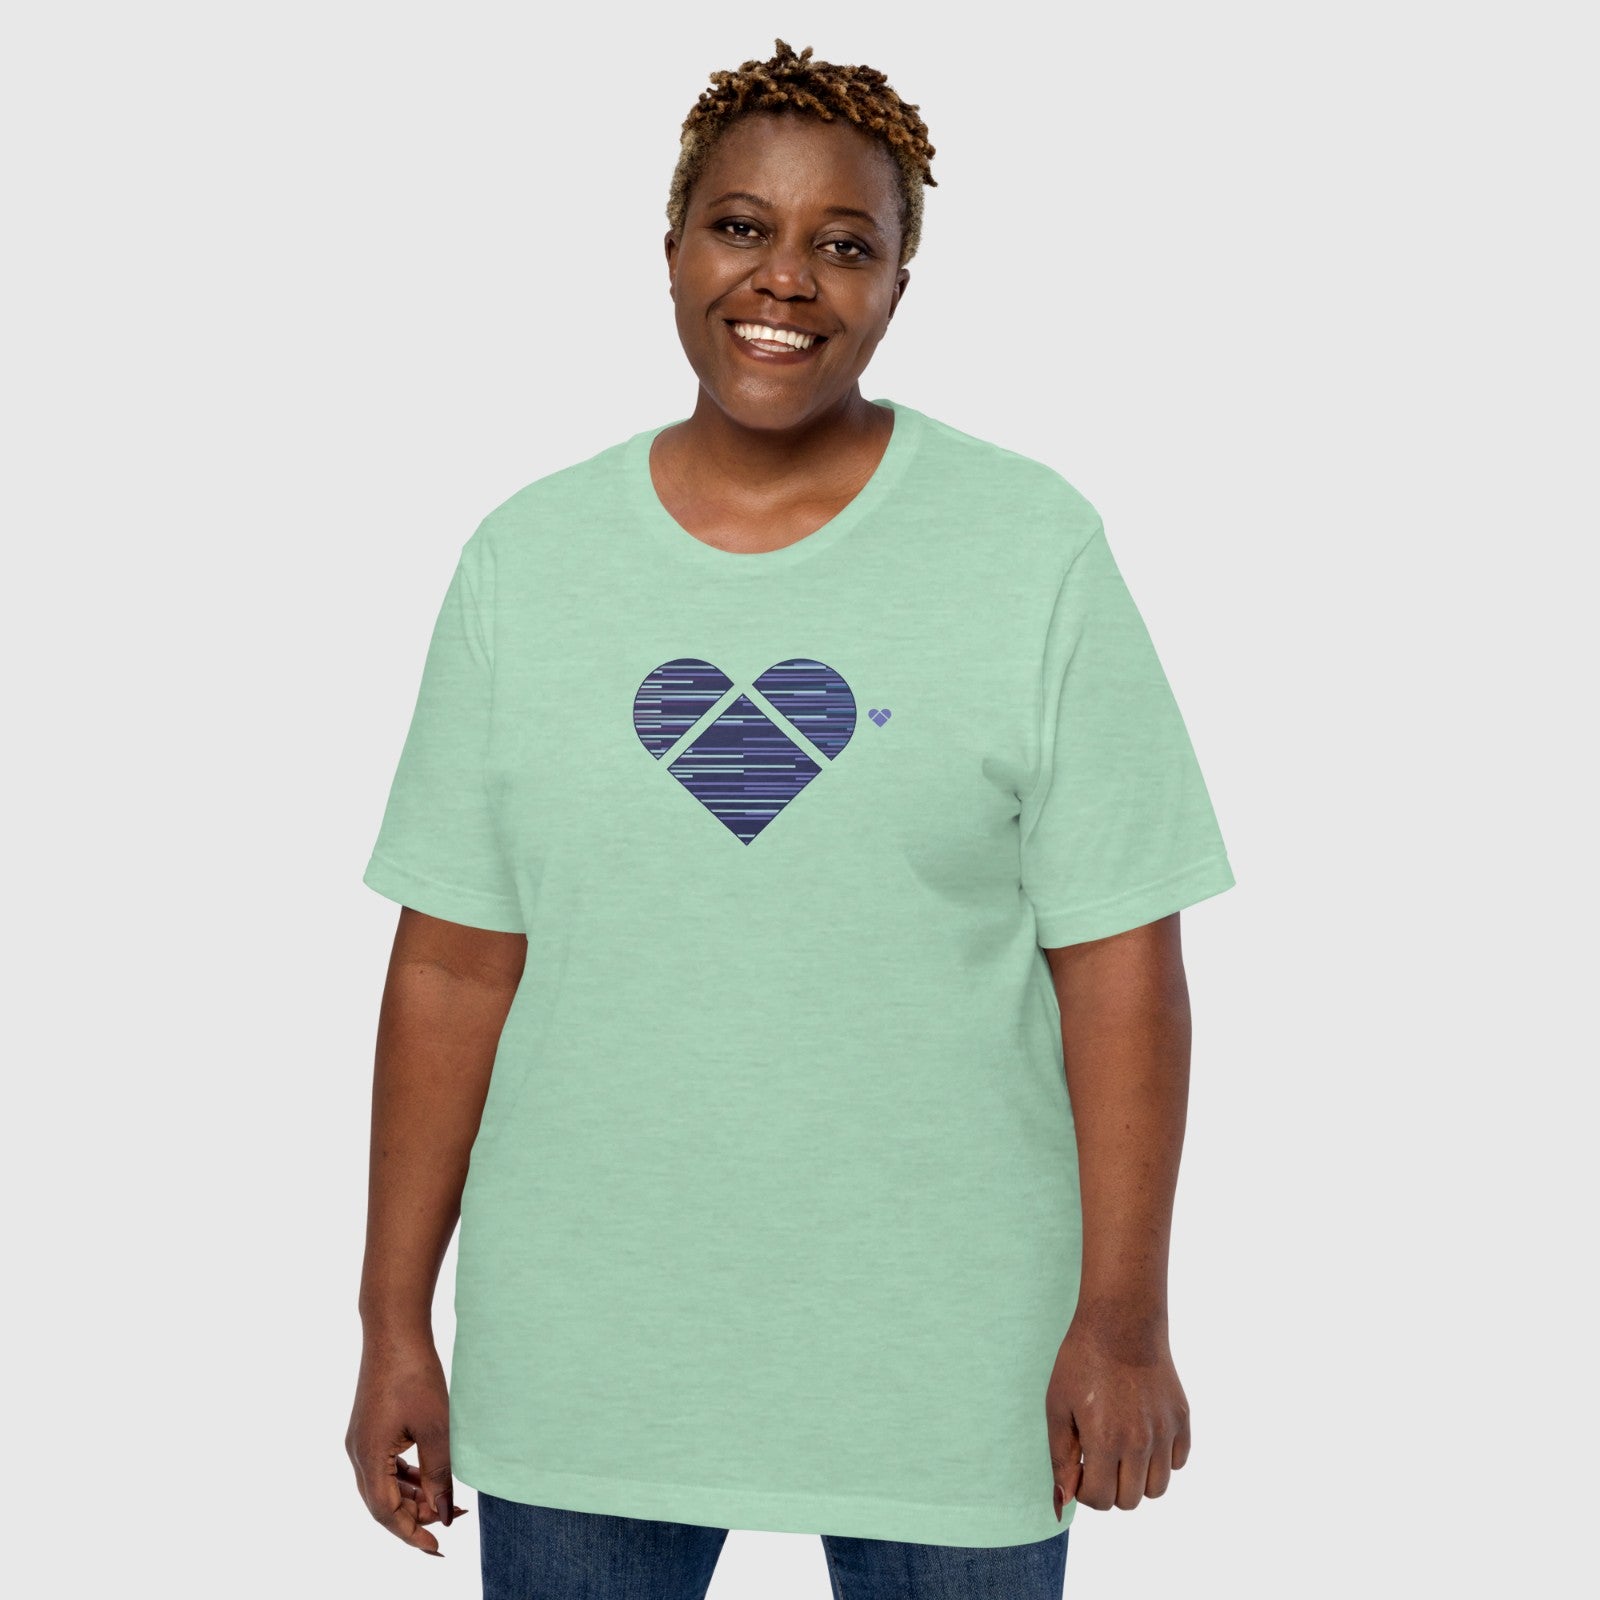 Periwinkle and mint heart design on Mint Tee